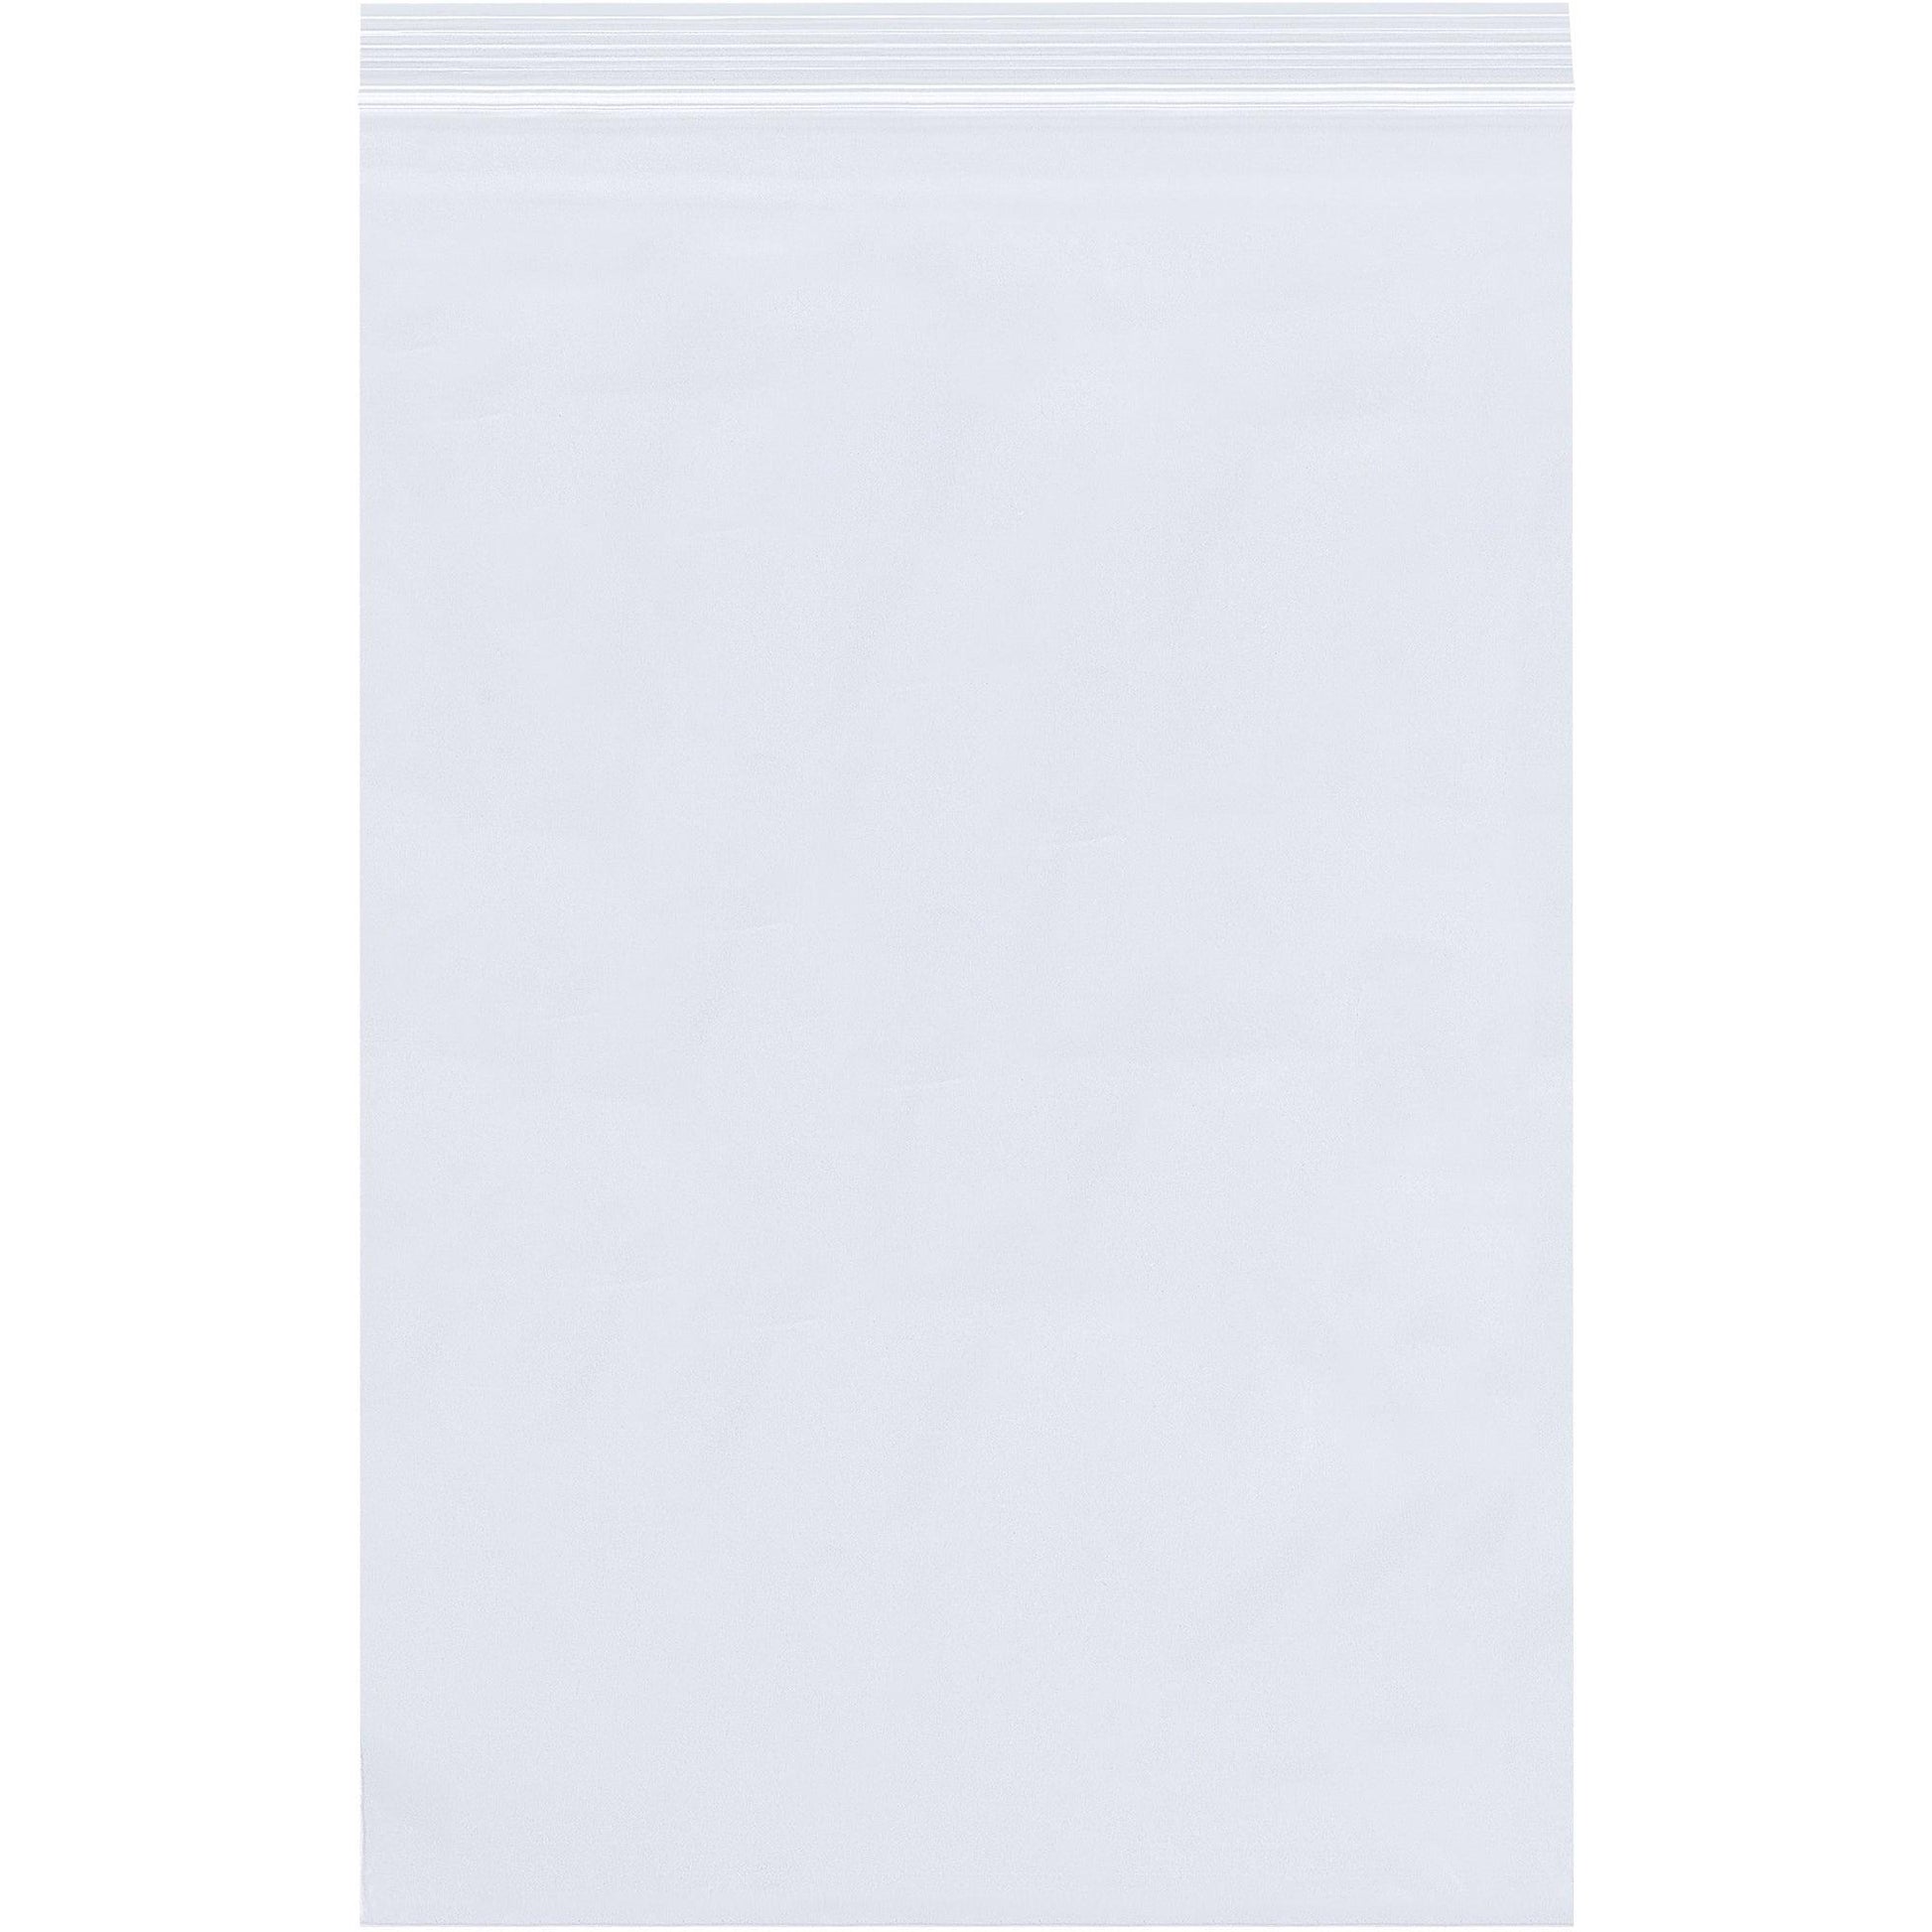 3 x 8" - 2 Mil Reclosable Poly Bags - PB3556